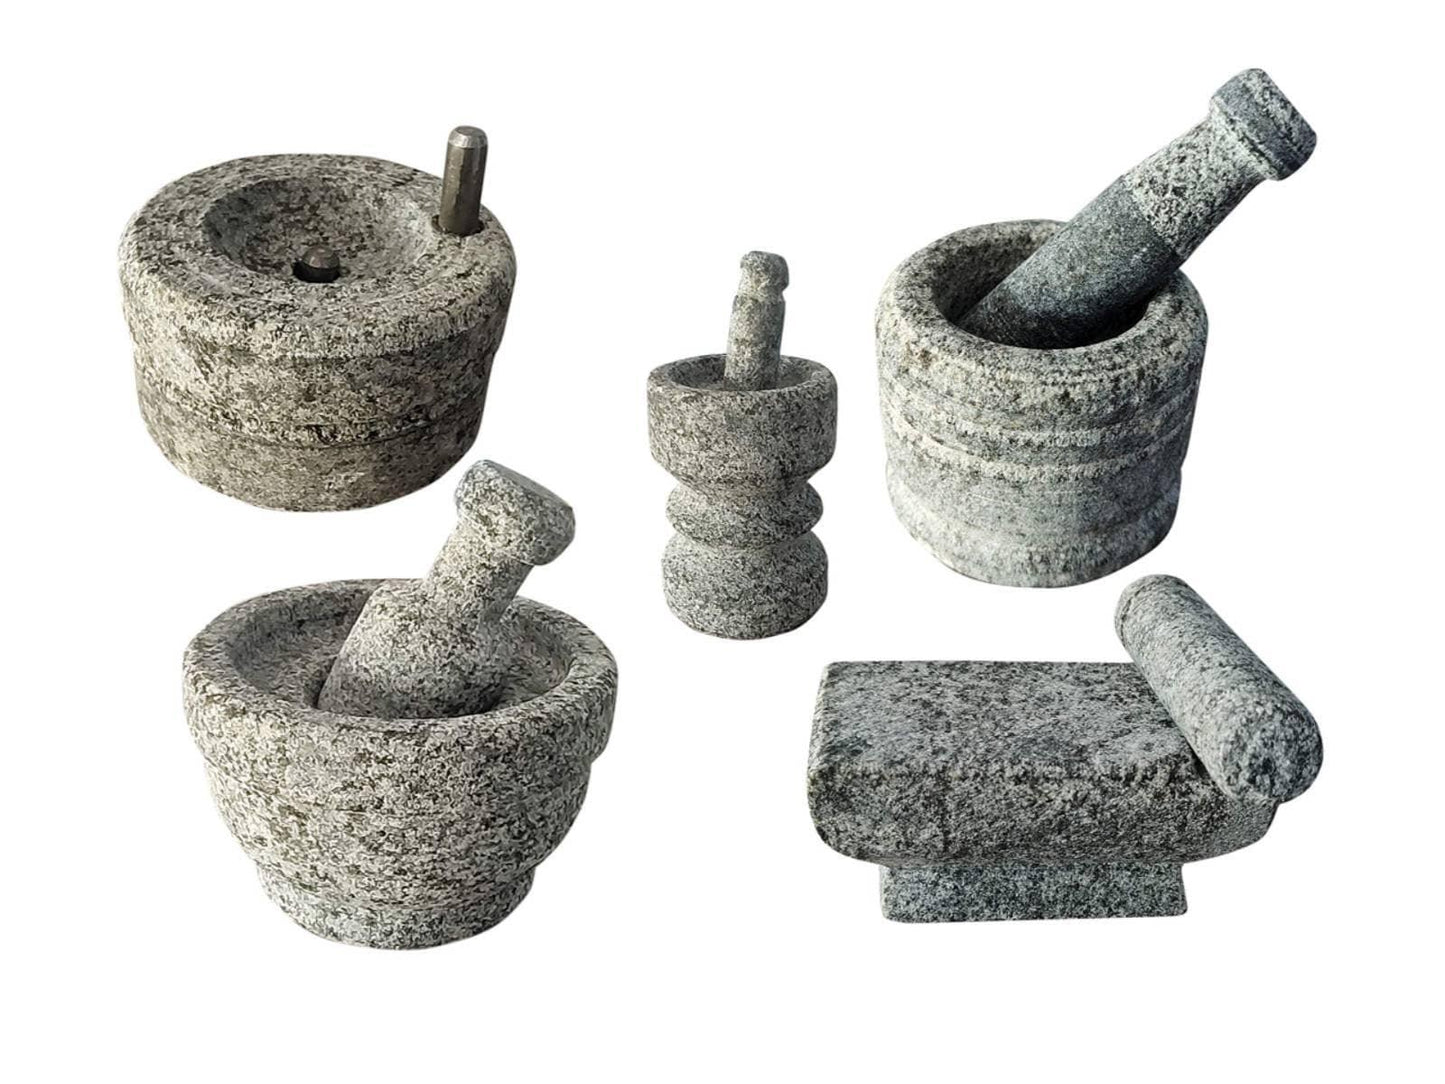 Real Cooking Miniature Set Miniature Mortar and Pestle Set Traditional Grinding Stone Kitchen Play Set Tiny Cooking Set Miniature Utensil - Rajbharti Crafts